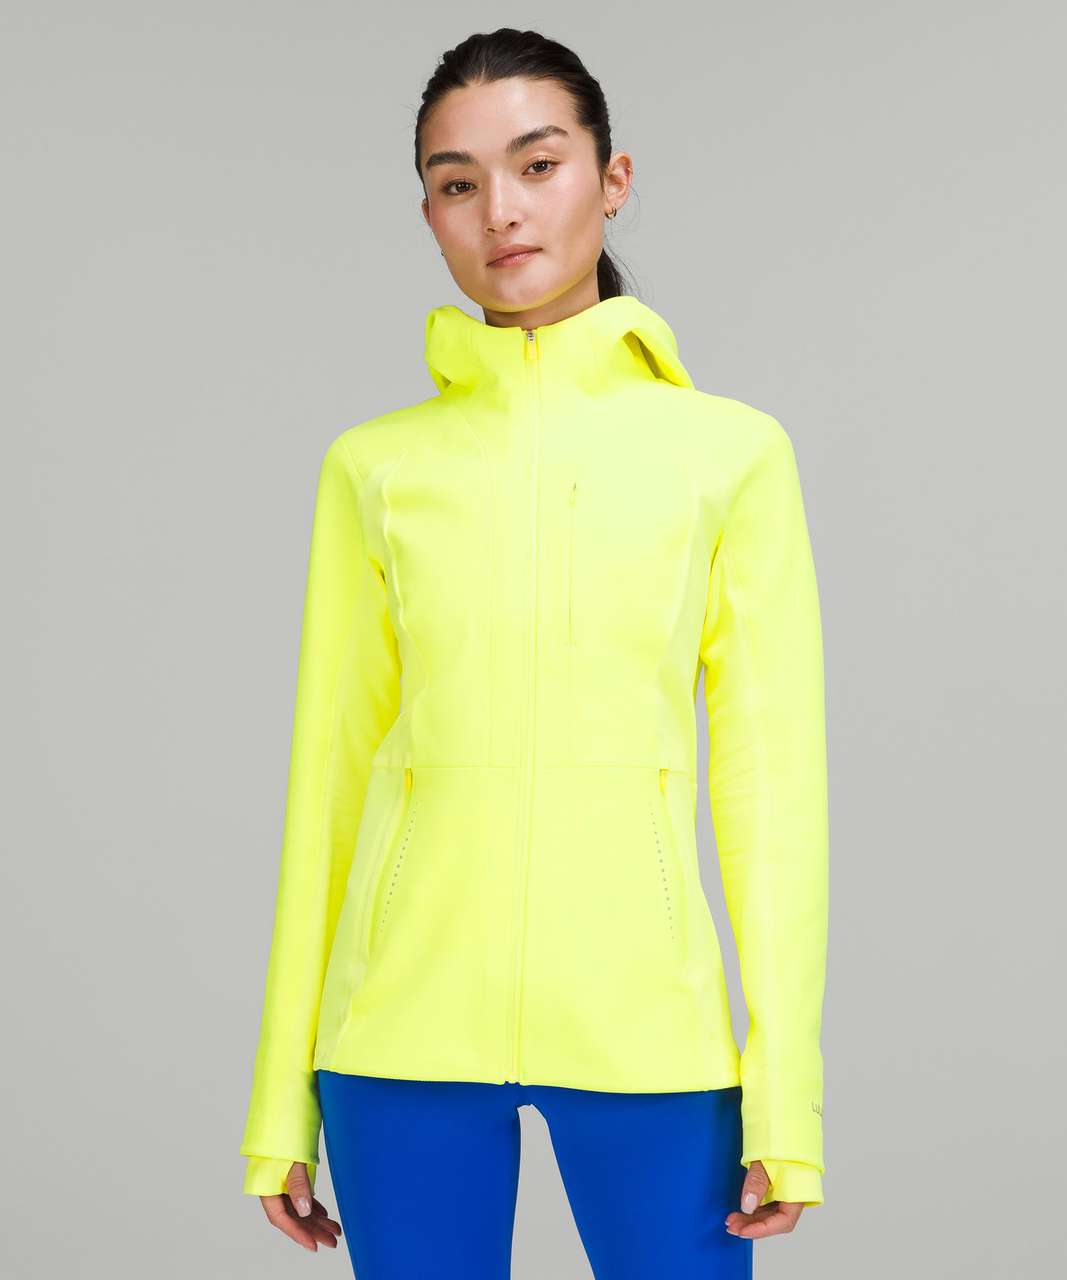 A Water-Repellent Jacket: Lululemon Cross Chill Jacket RepelShell, Fall  Weather Is Here, So Bring One of These 12 Jackets When You Go Running